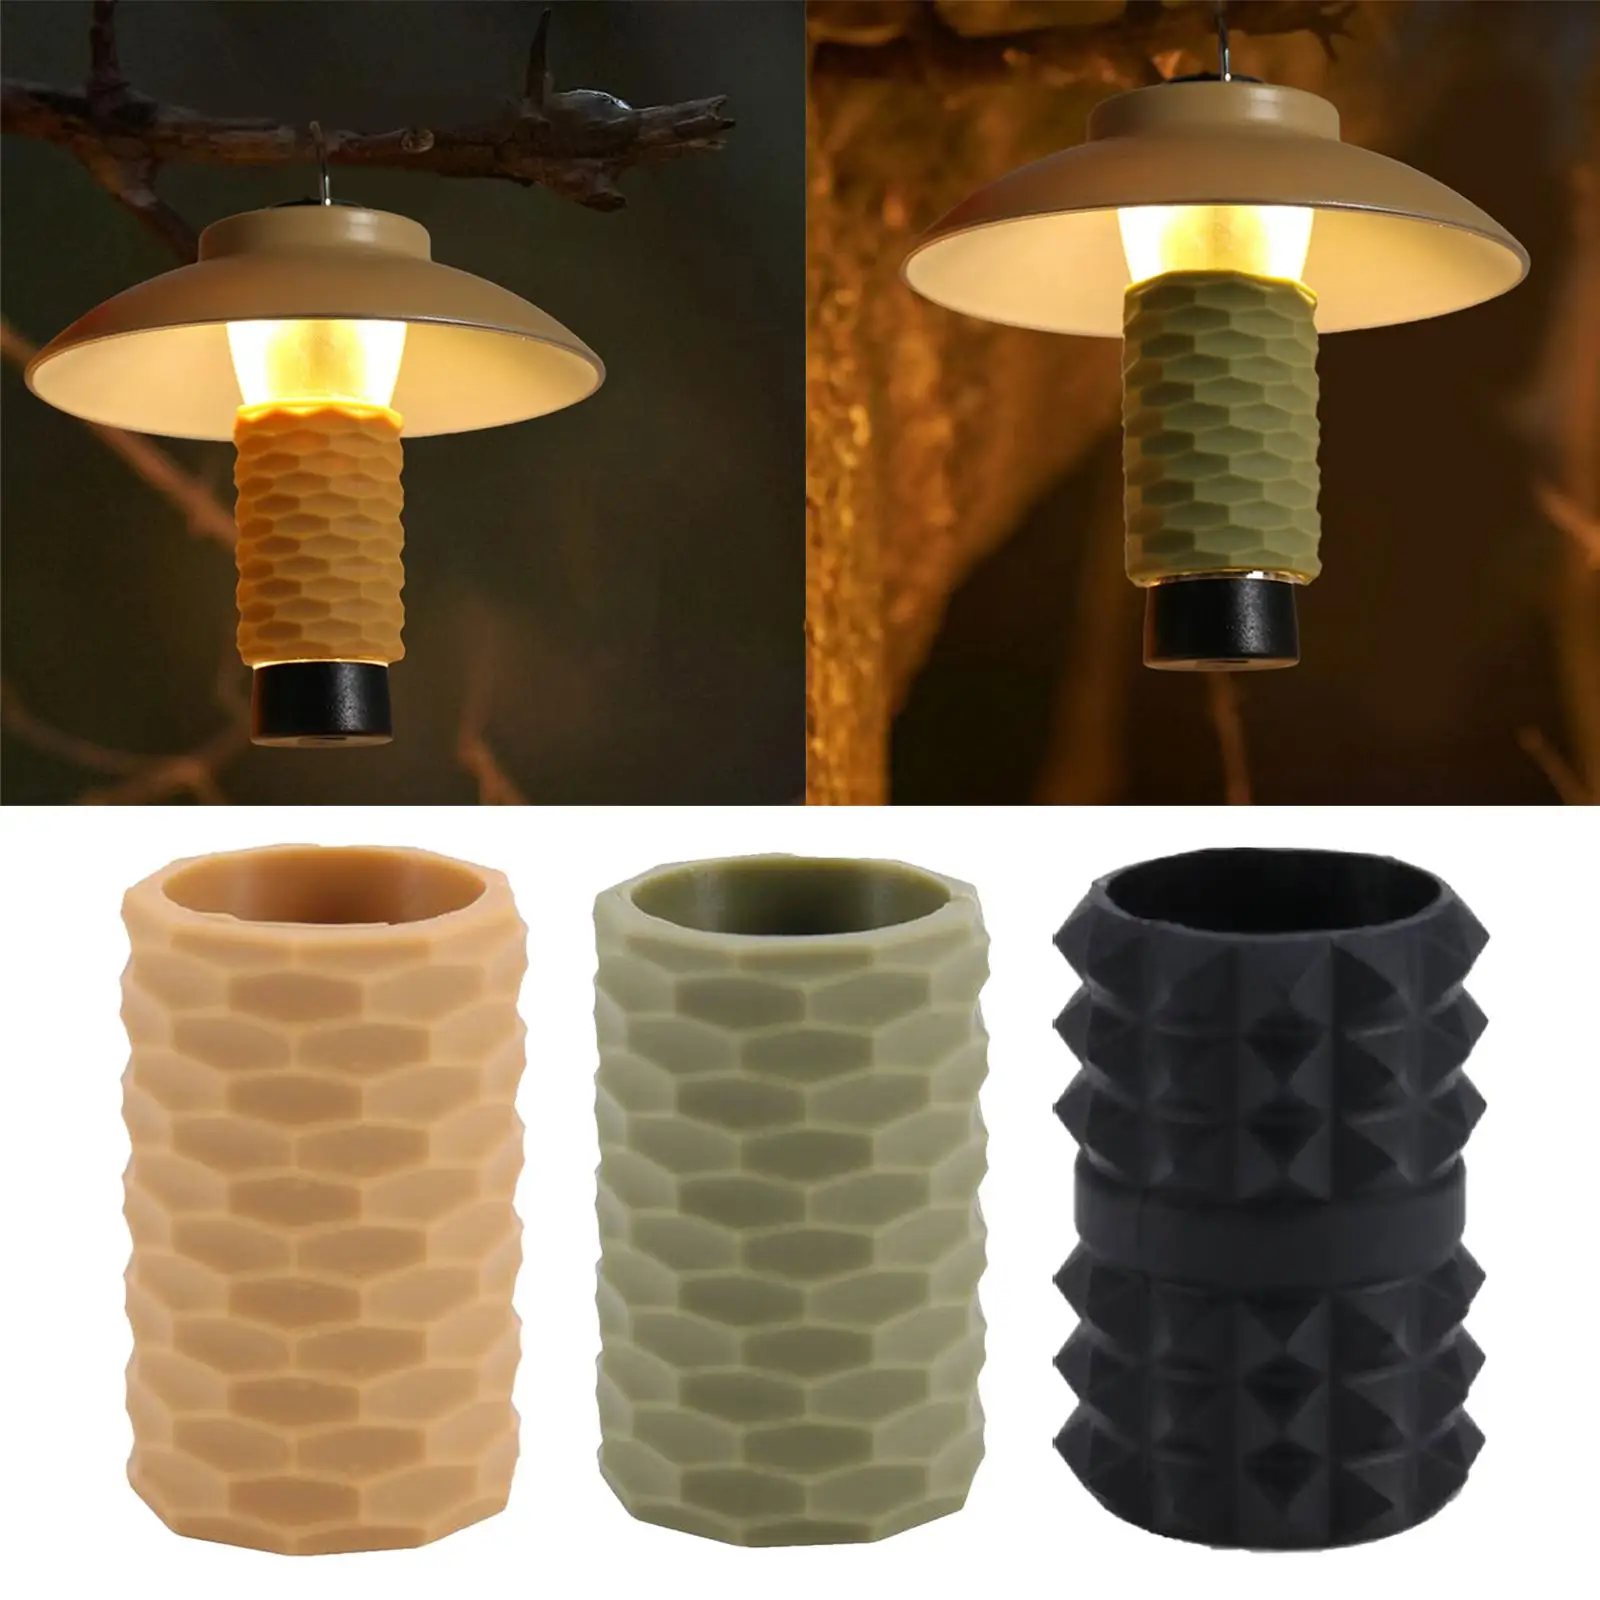 Lamp Sleeve Cover Camping Lights Cover Flashlight Sleeves Accessories LED Lights Lighthouse Lantern Lampshade for Backpacking